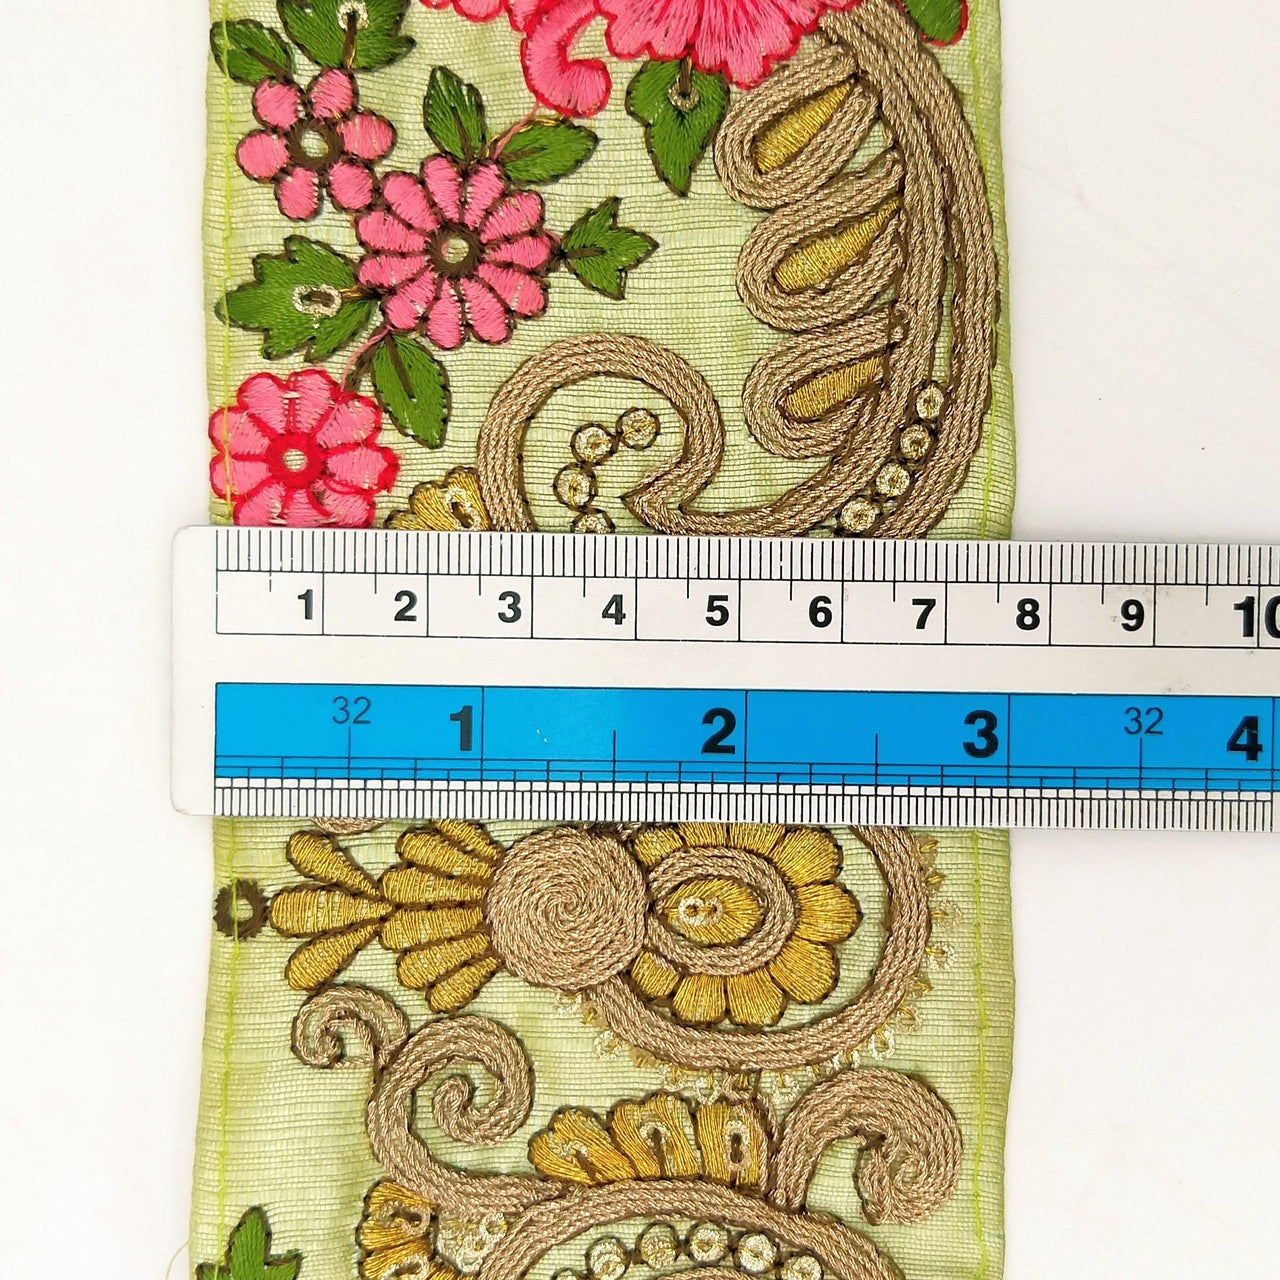 Sage Green Art Silk Fabric Trim With Pink, Green, Fuchsia Pink And Gold Floral Embroidery